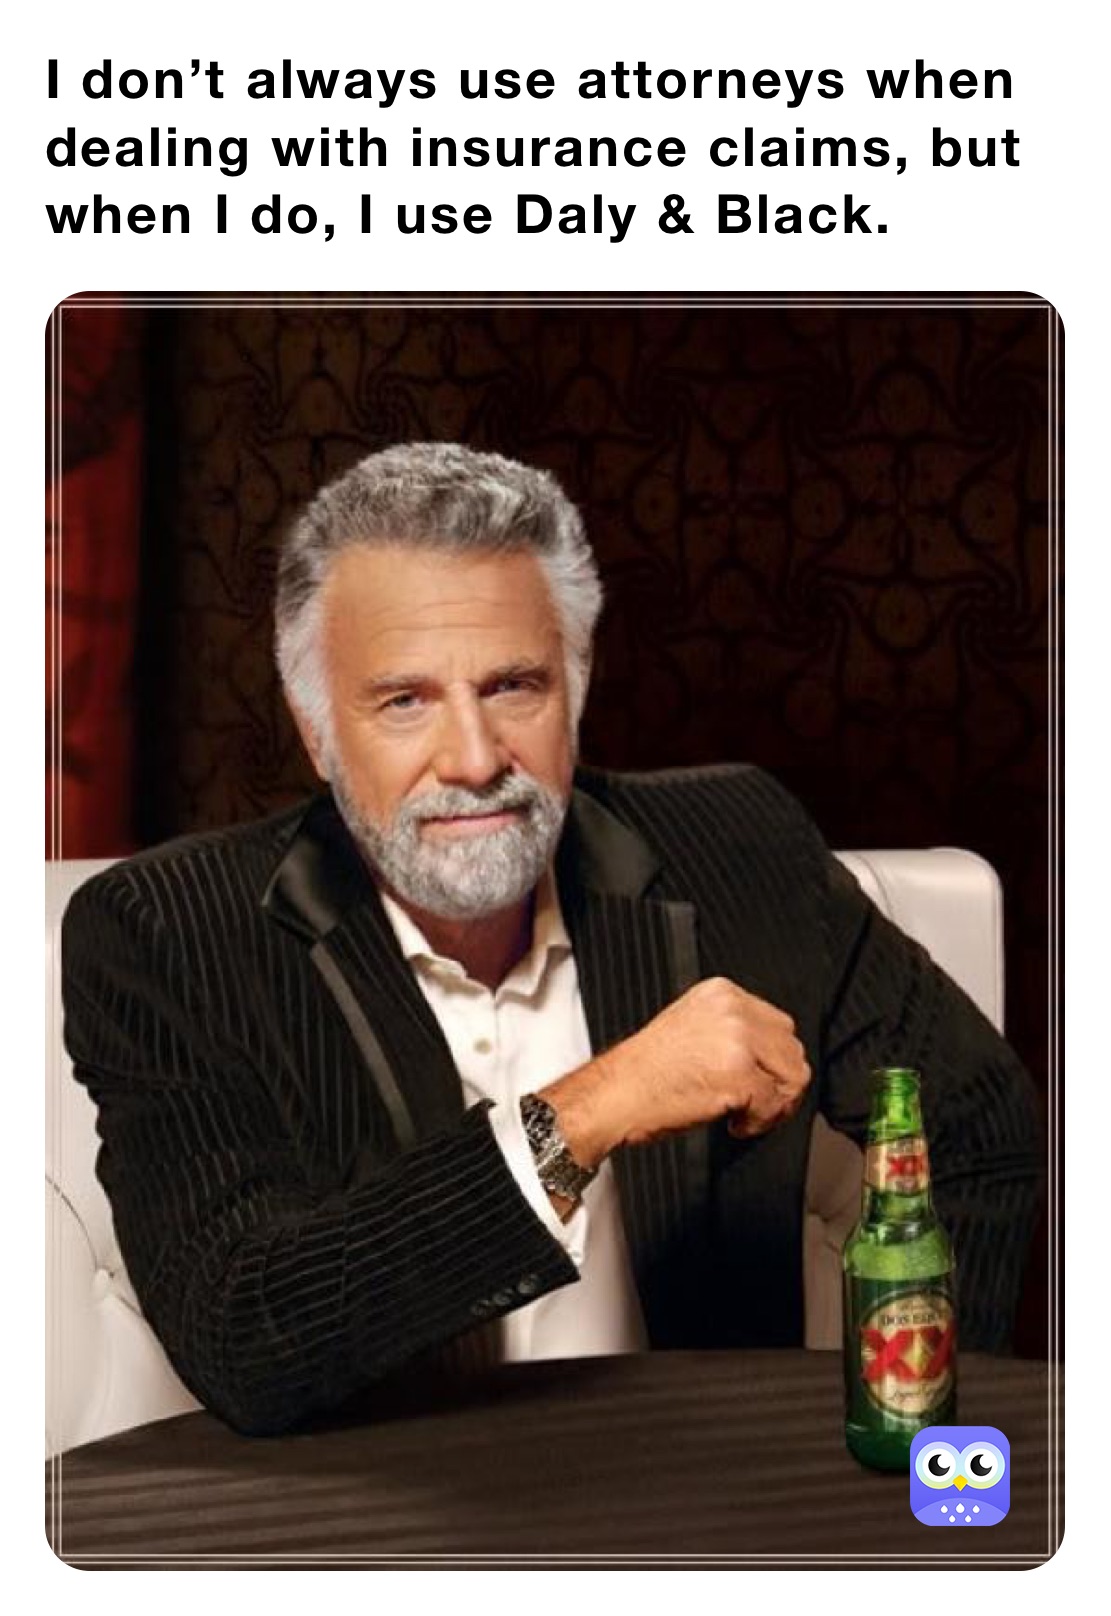 I don’t always use attorneys when dealing with insurance claims, but when I do, I use Daly & Black. 